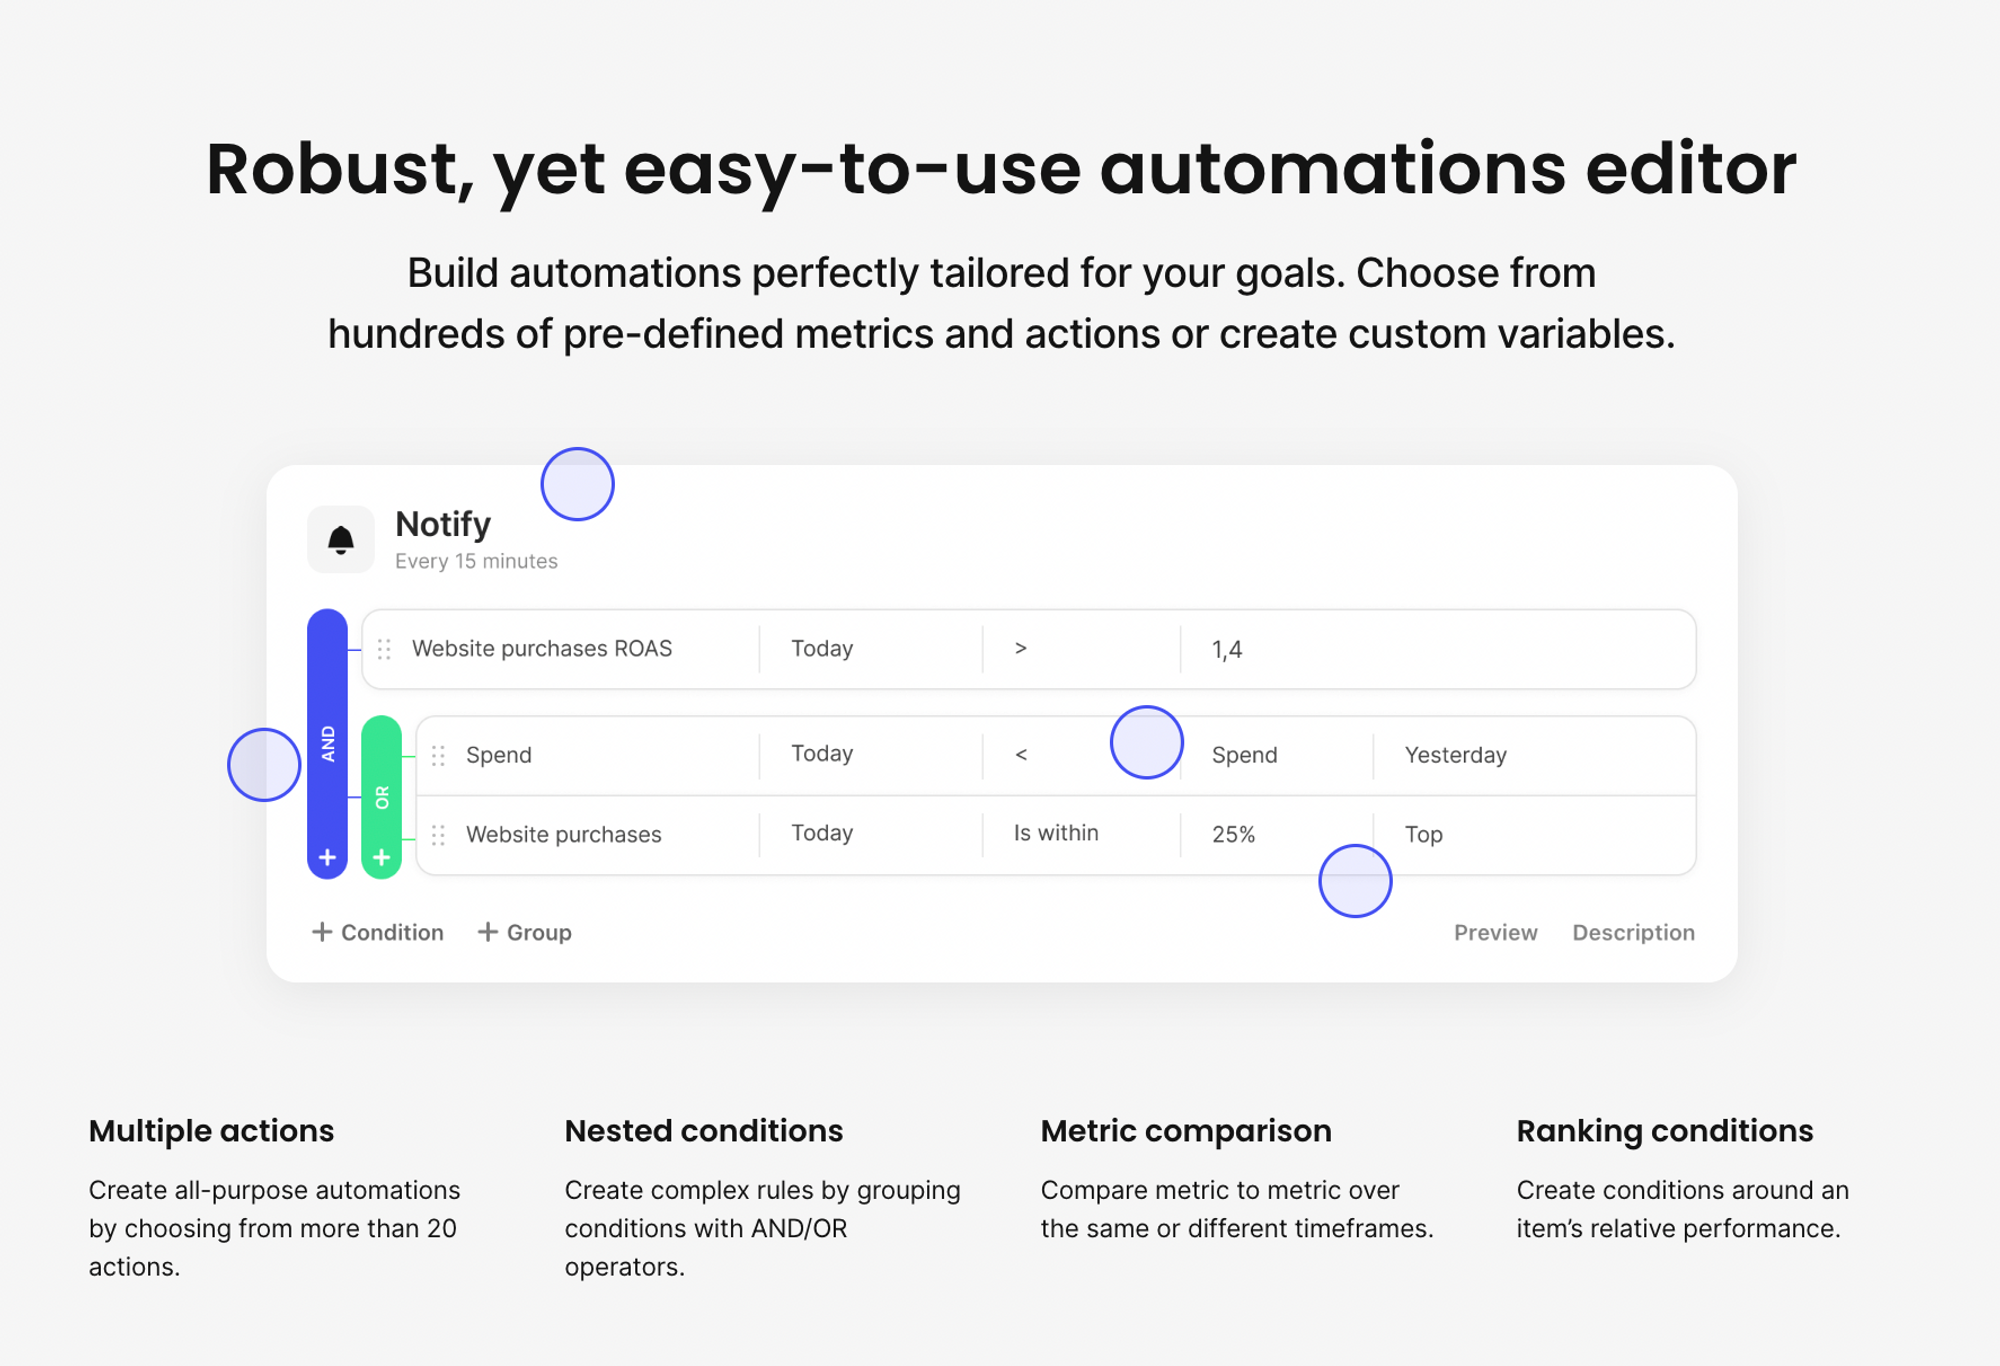 A robust automation engine can help you adjust bids, pause ads, and more. And external data integration enables creative strategies.